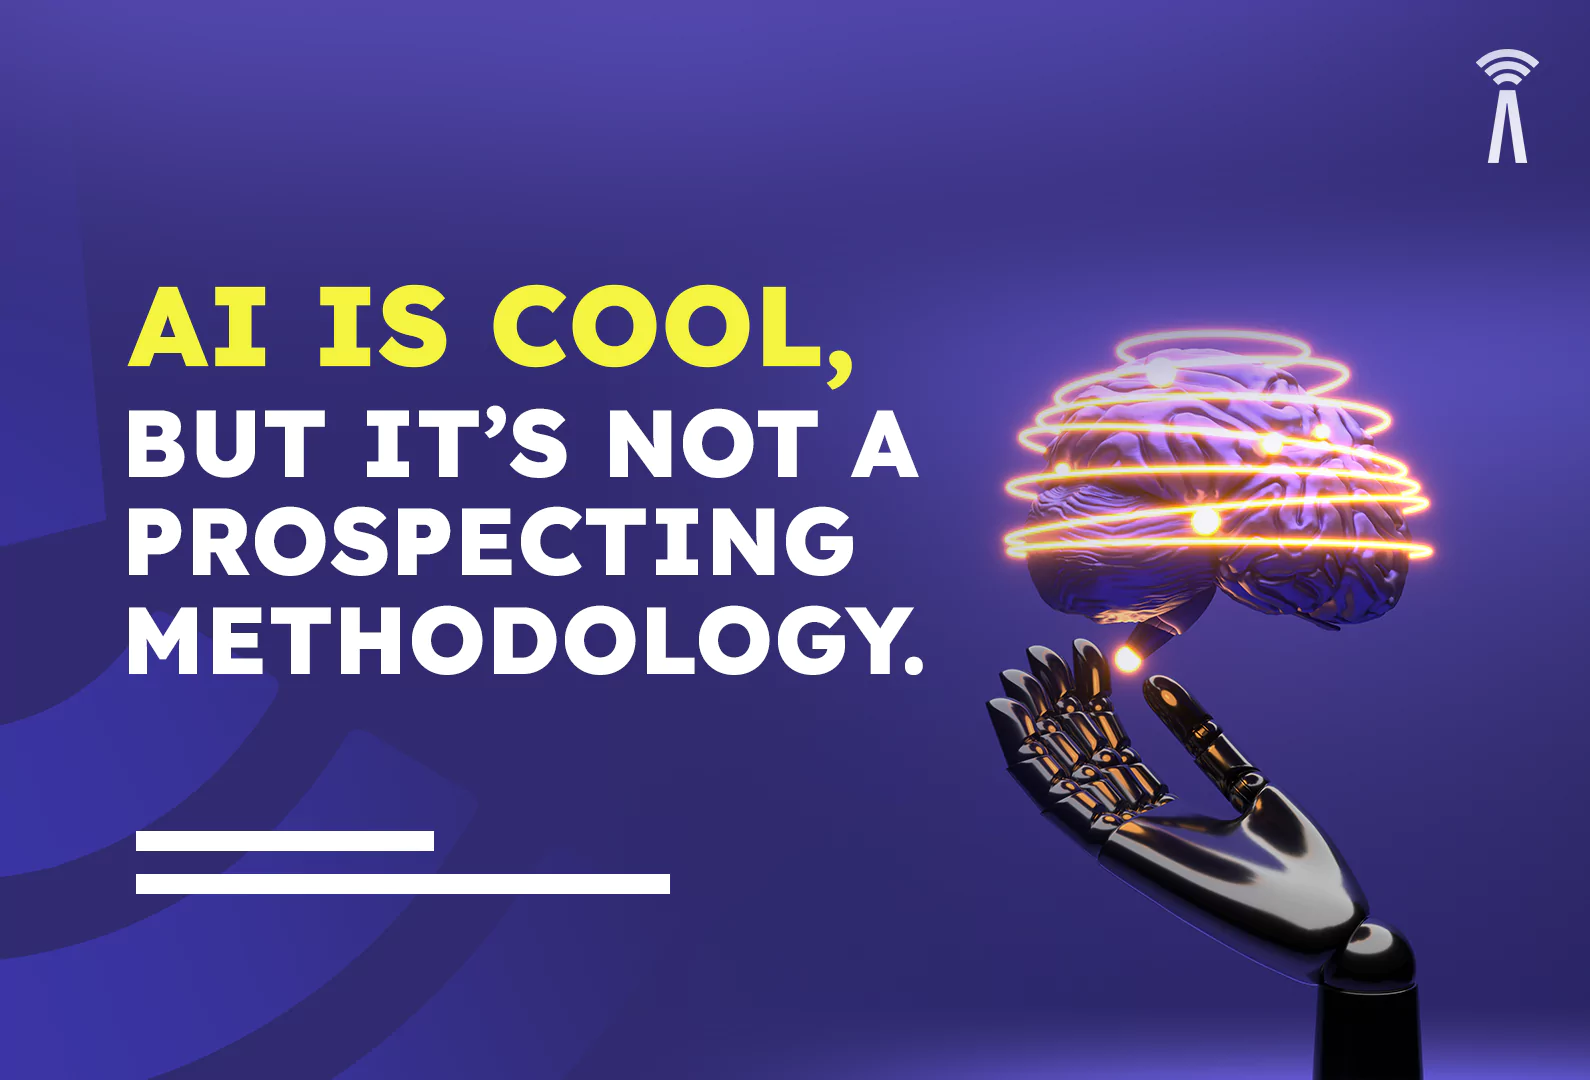 ai-is-cool-but-its-not-a-prospecting-methodology